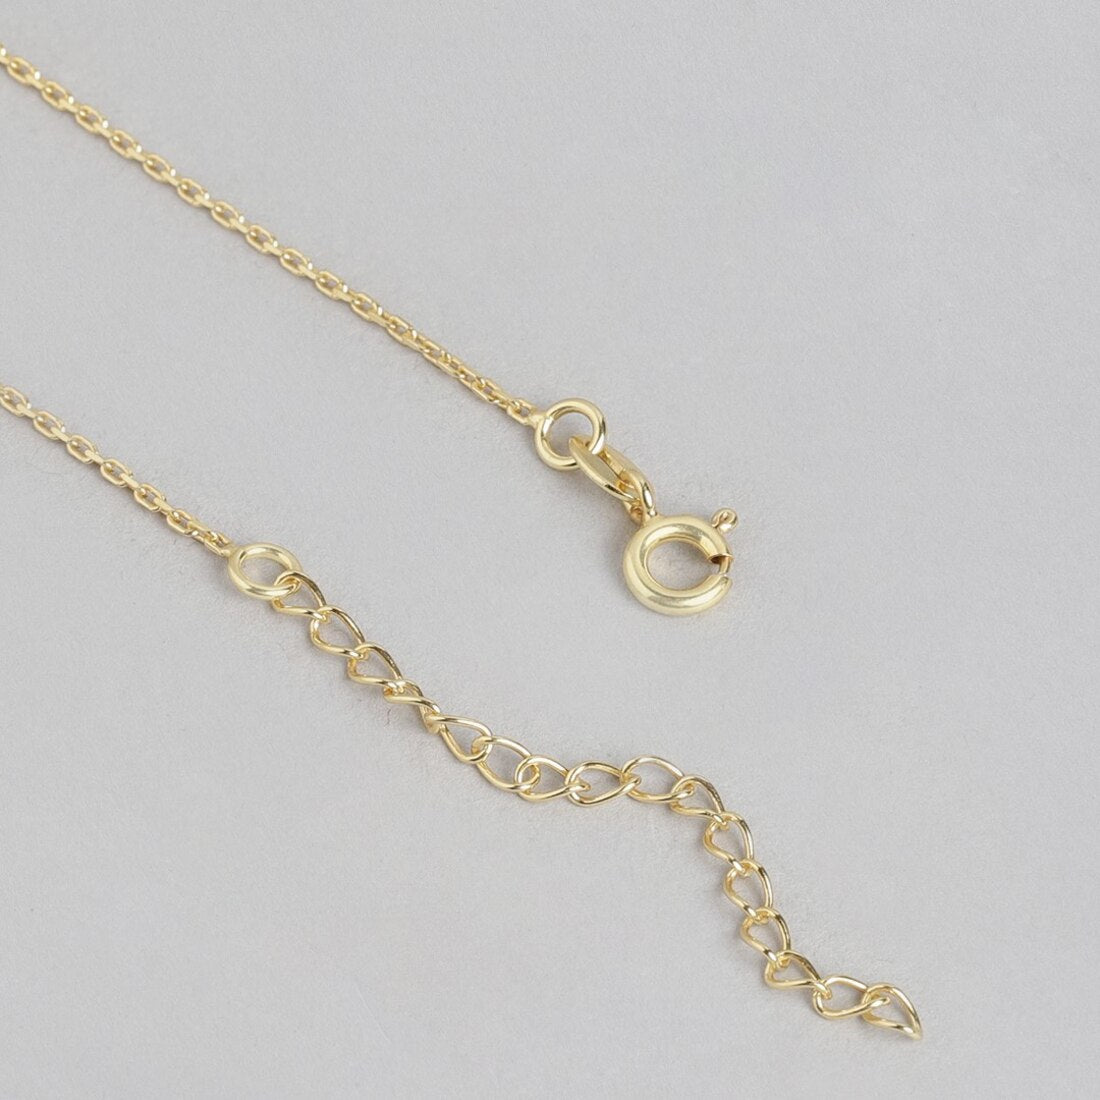 Heartbeats of Love Gold Plated 925 Sterling Silver Necklace with CZ